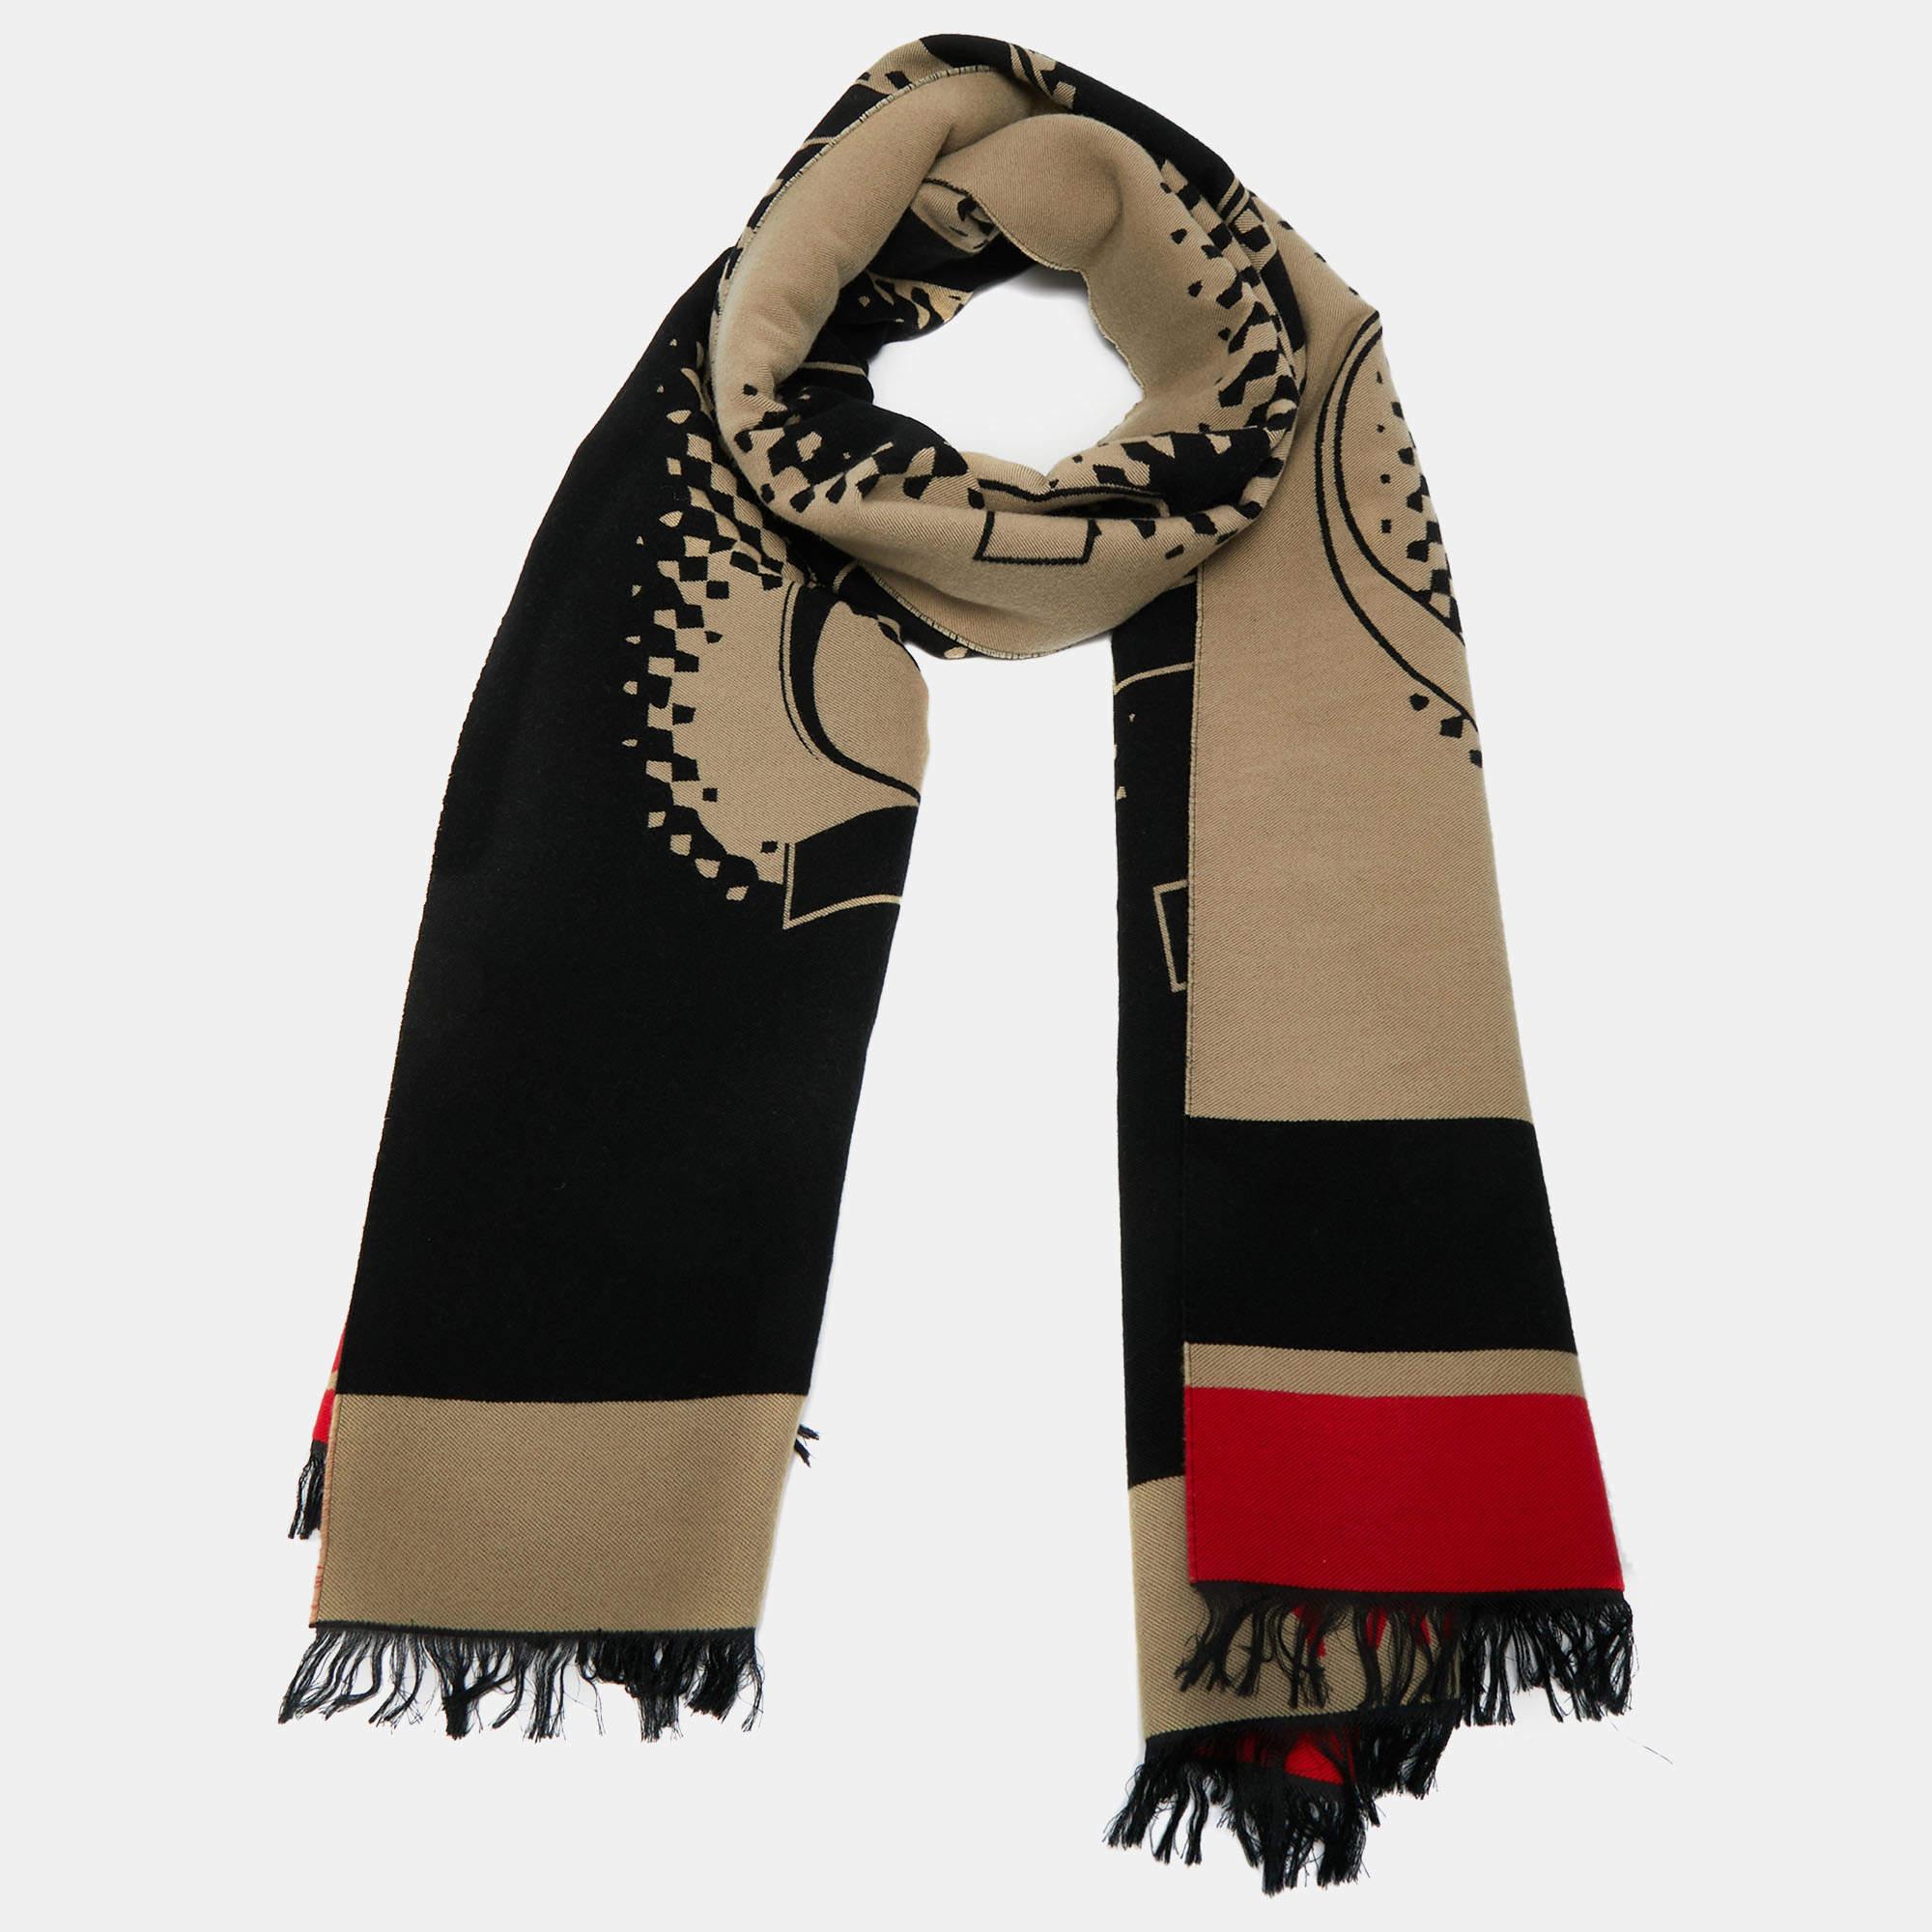 Classy and stylish are some words that come to our minds when we have a look at the scarf. The label brings you this versatile creation made from luxurious materials that you style with many outfits.

Includes: Price Tag